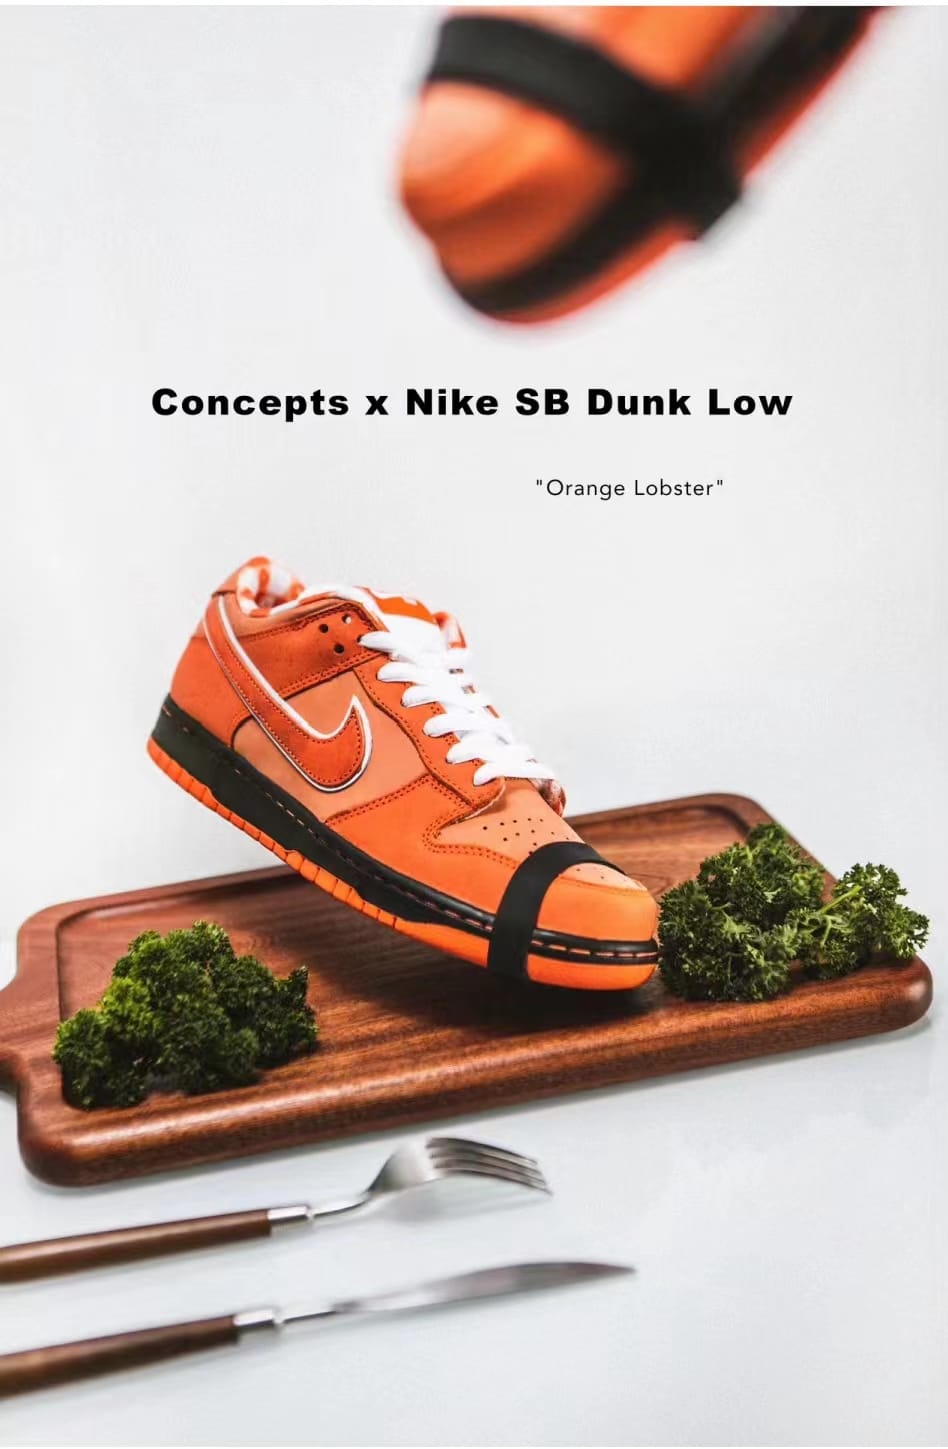 Nike Dunk Concepts Orange Lobster Reps: A Flavorful Sneaker Experience